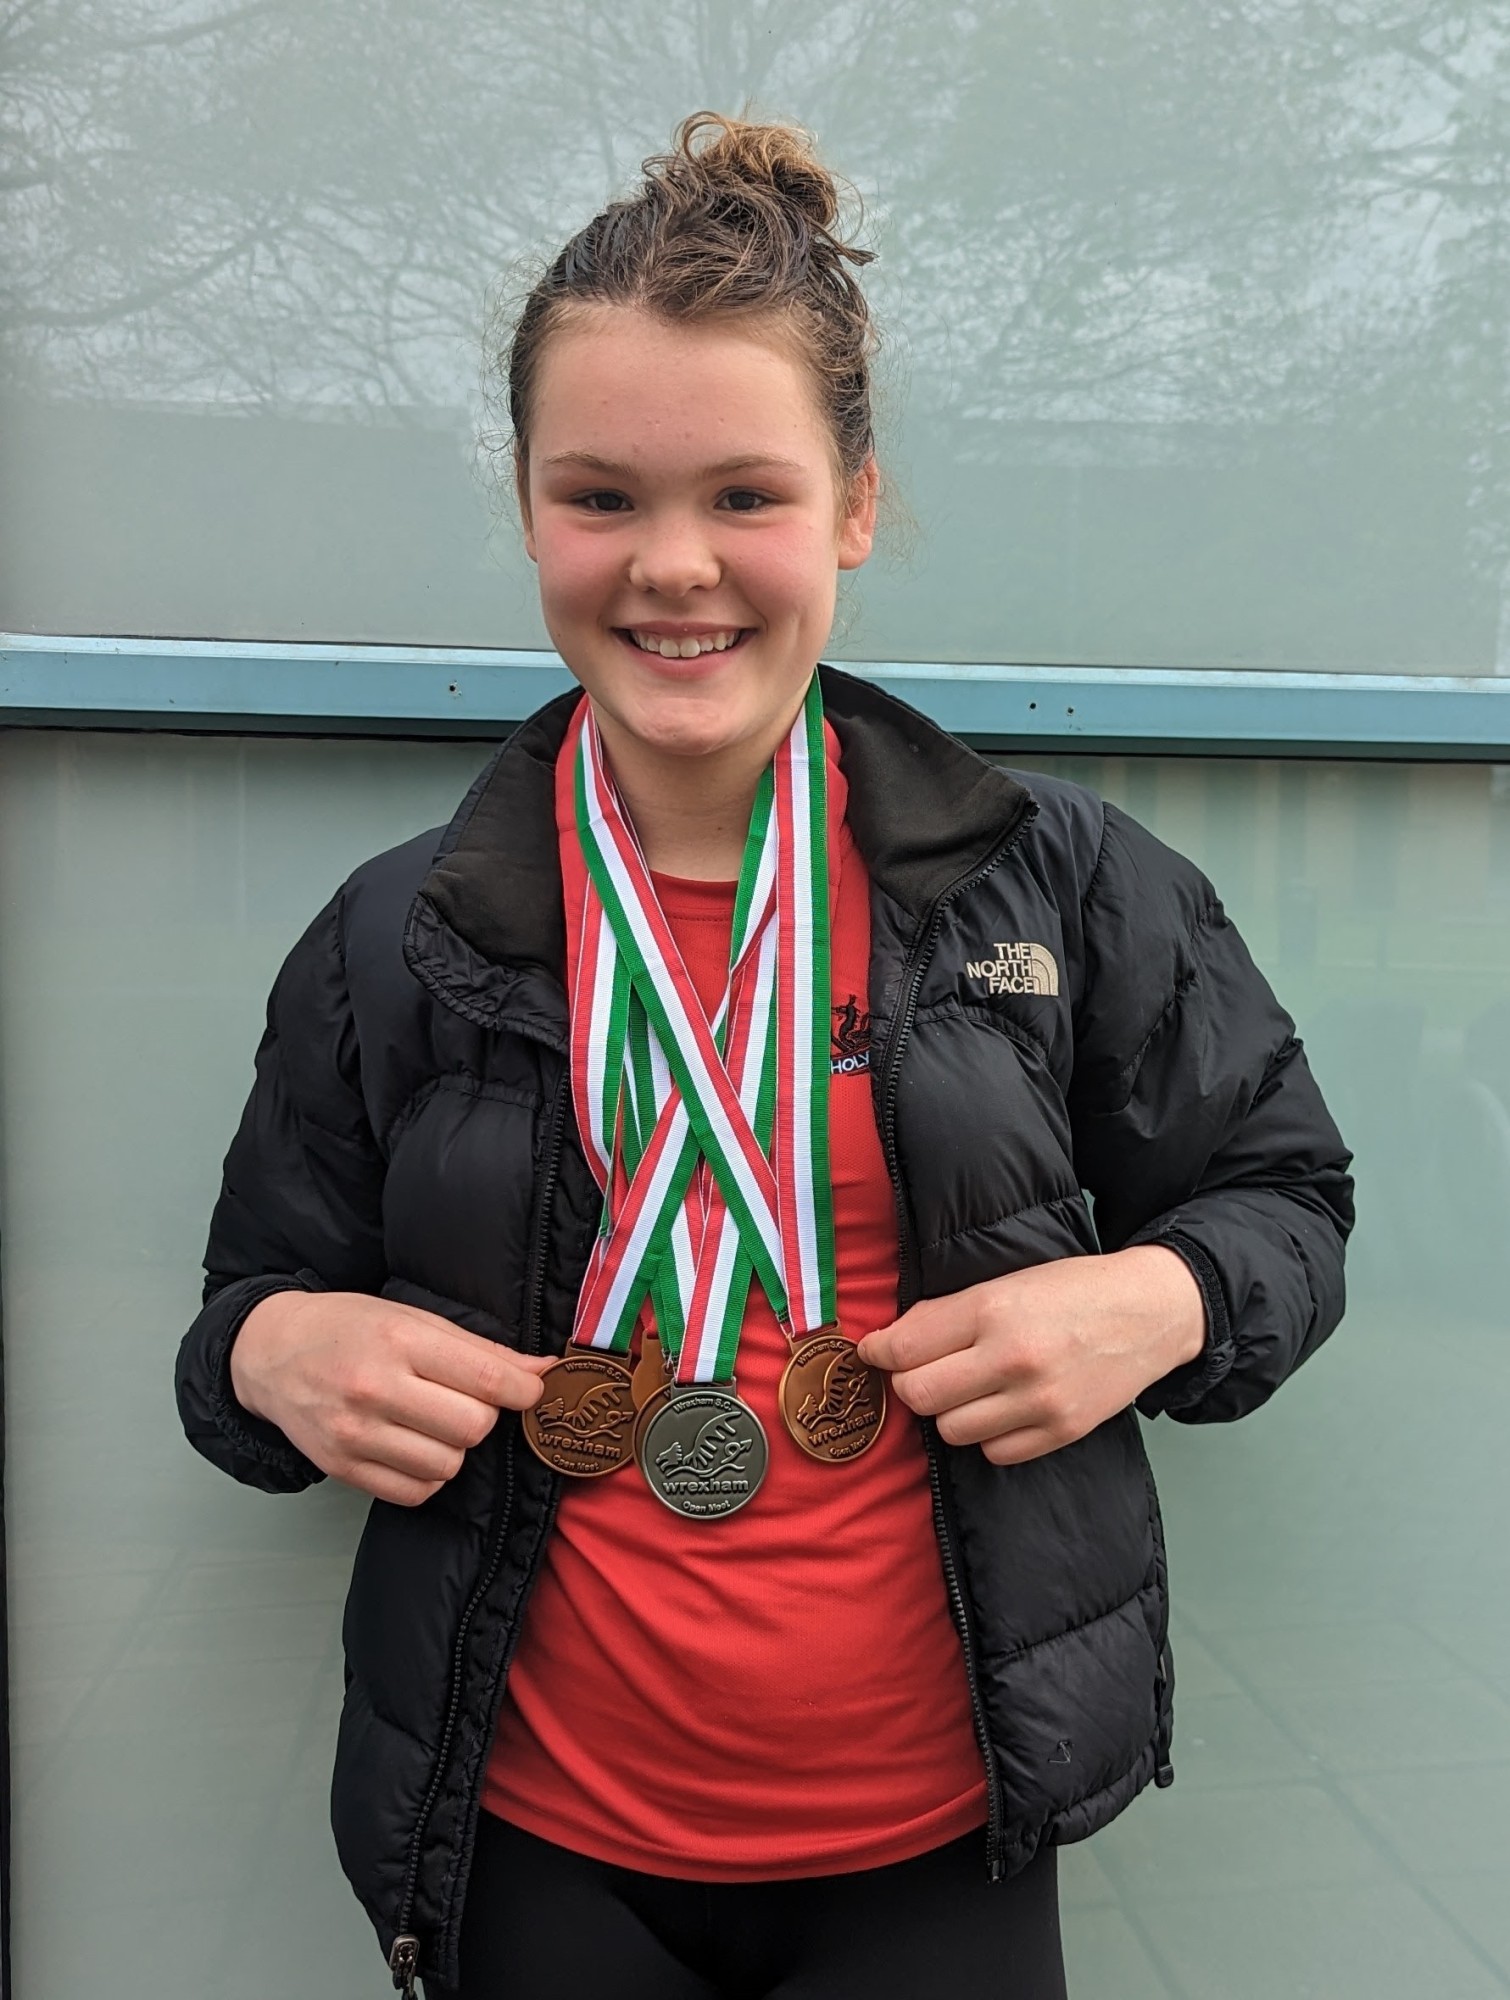 Clemmie wearing her medals